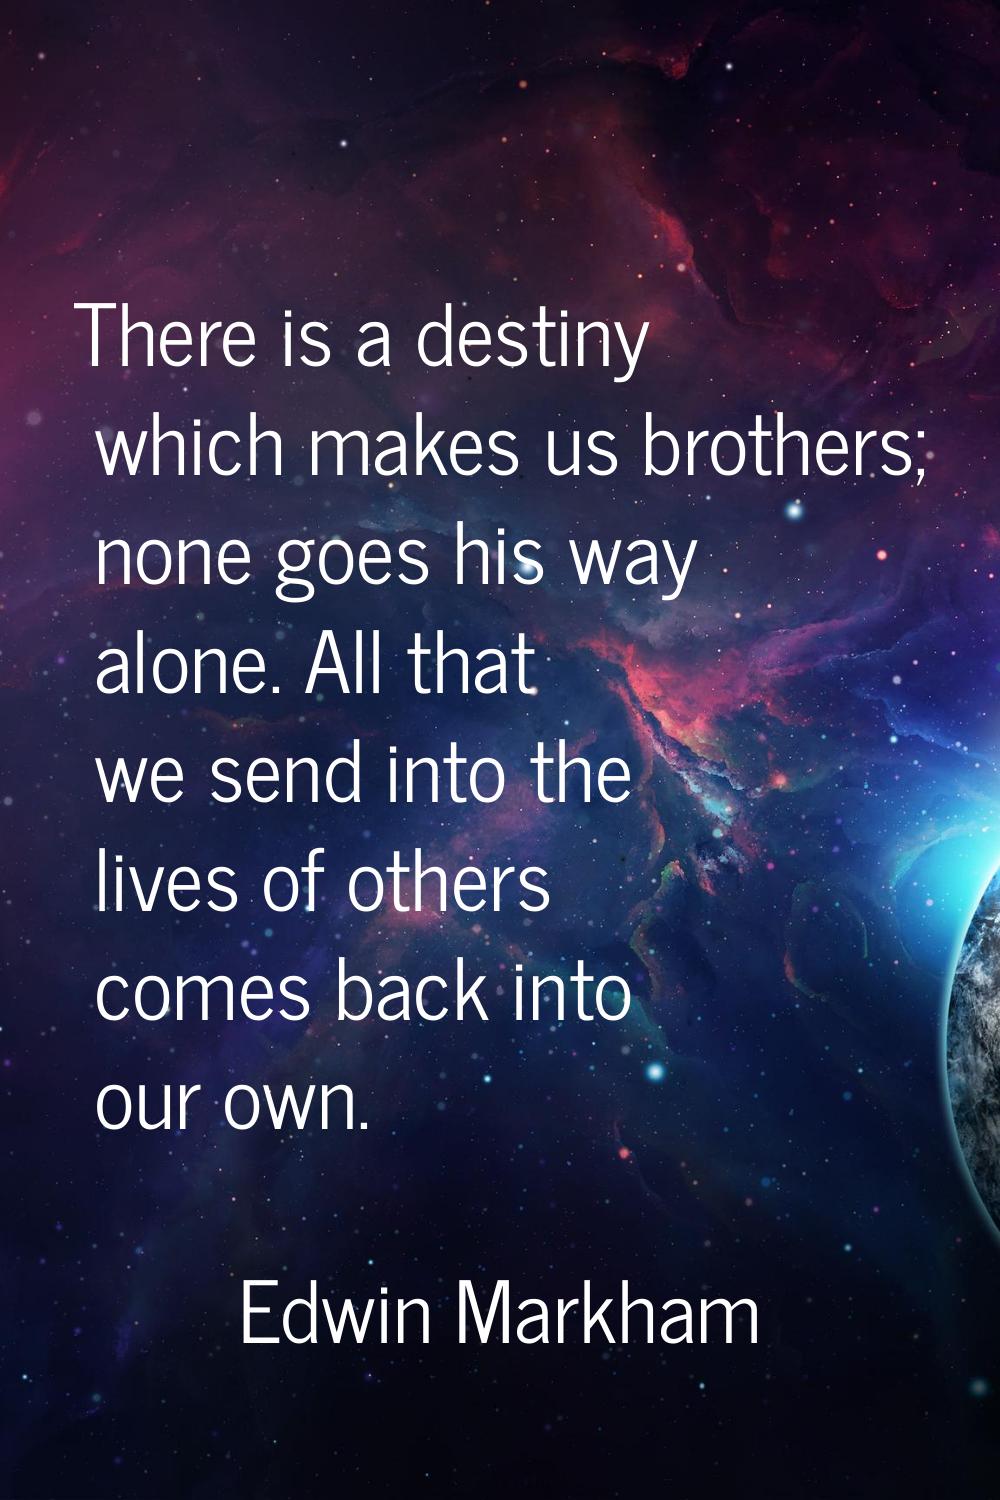 There is a destiny which makes us brothers; none goes his way alone. All that we send into the live